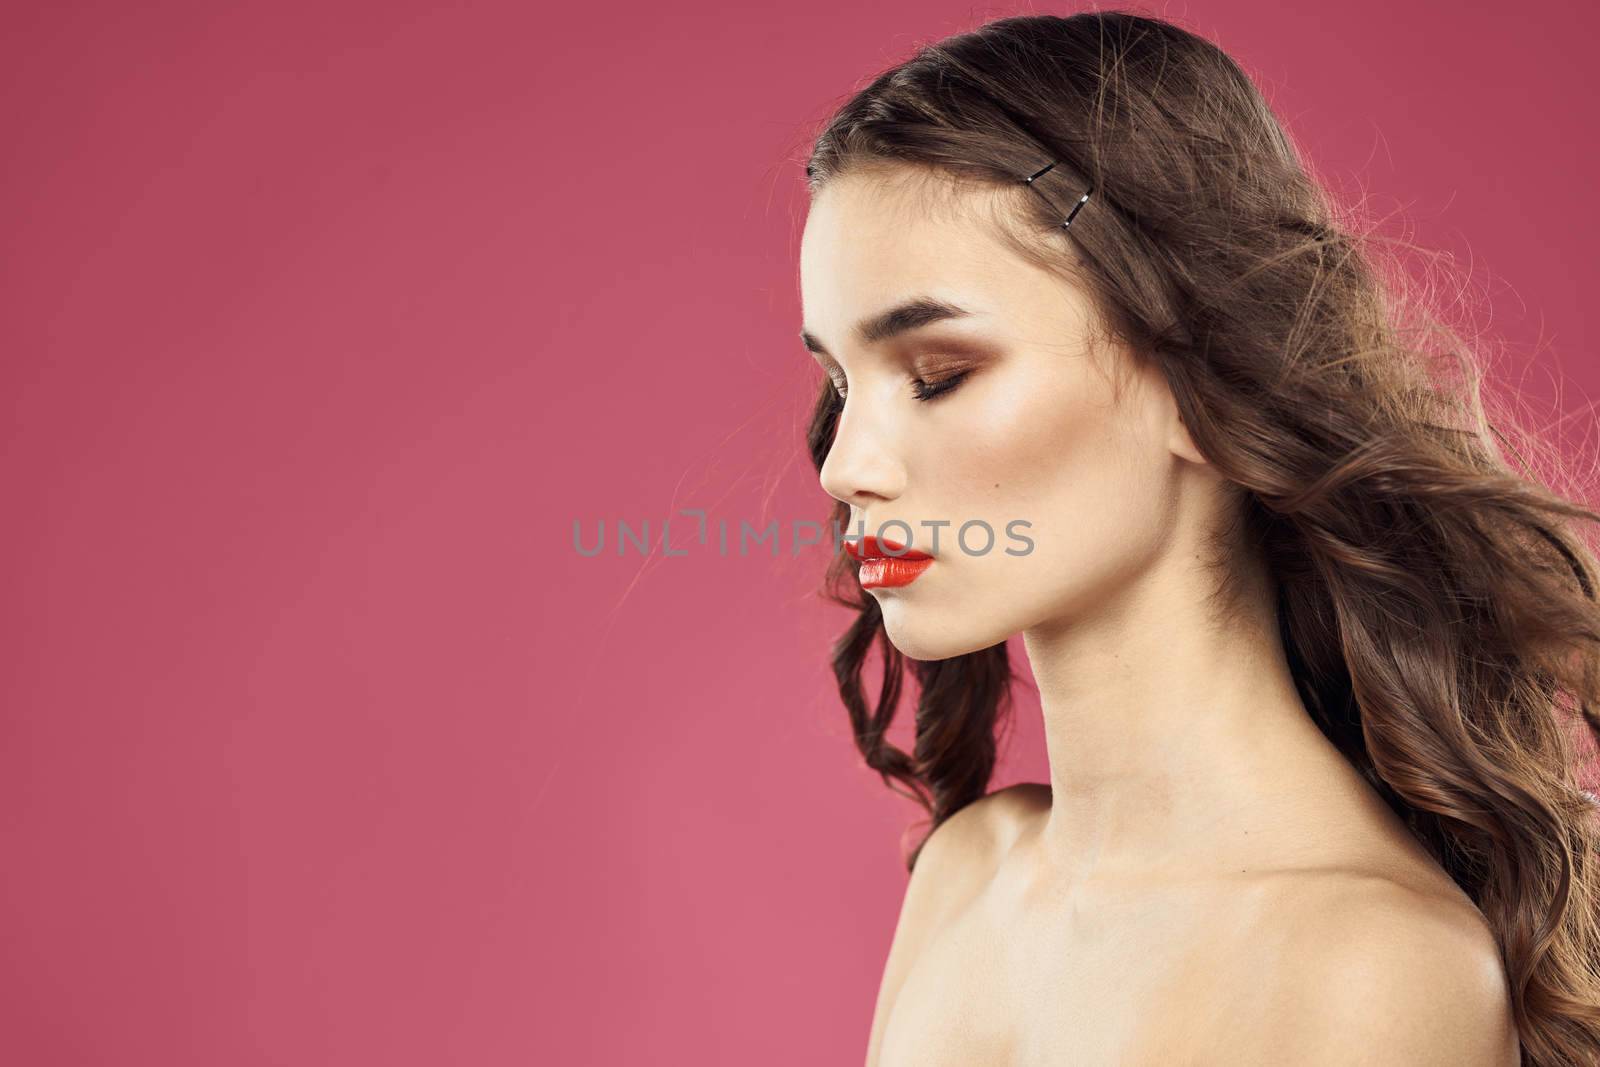 Beautiful brunette woman with makeup on her face on a pink background naked shoulders. High quality photo